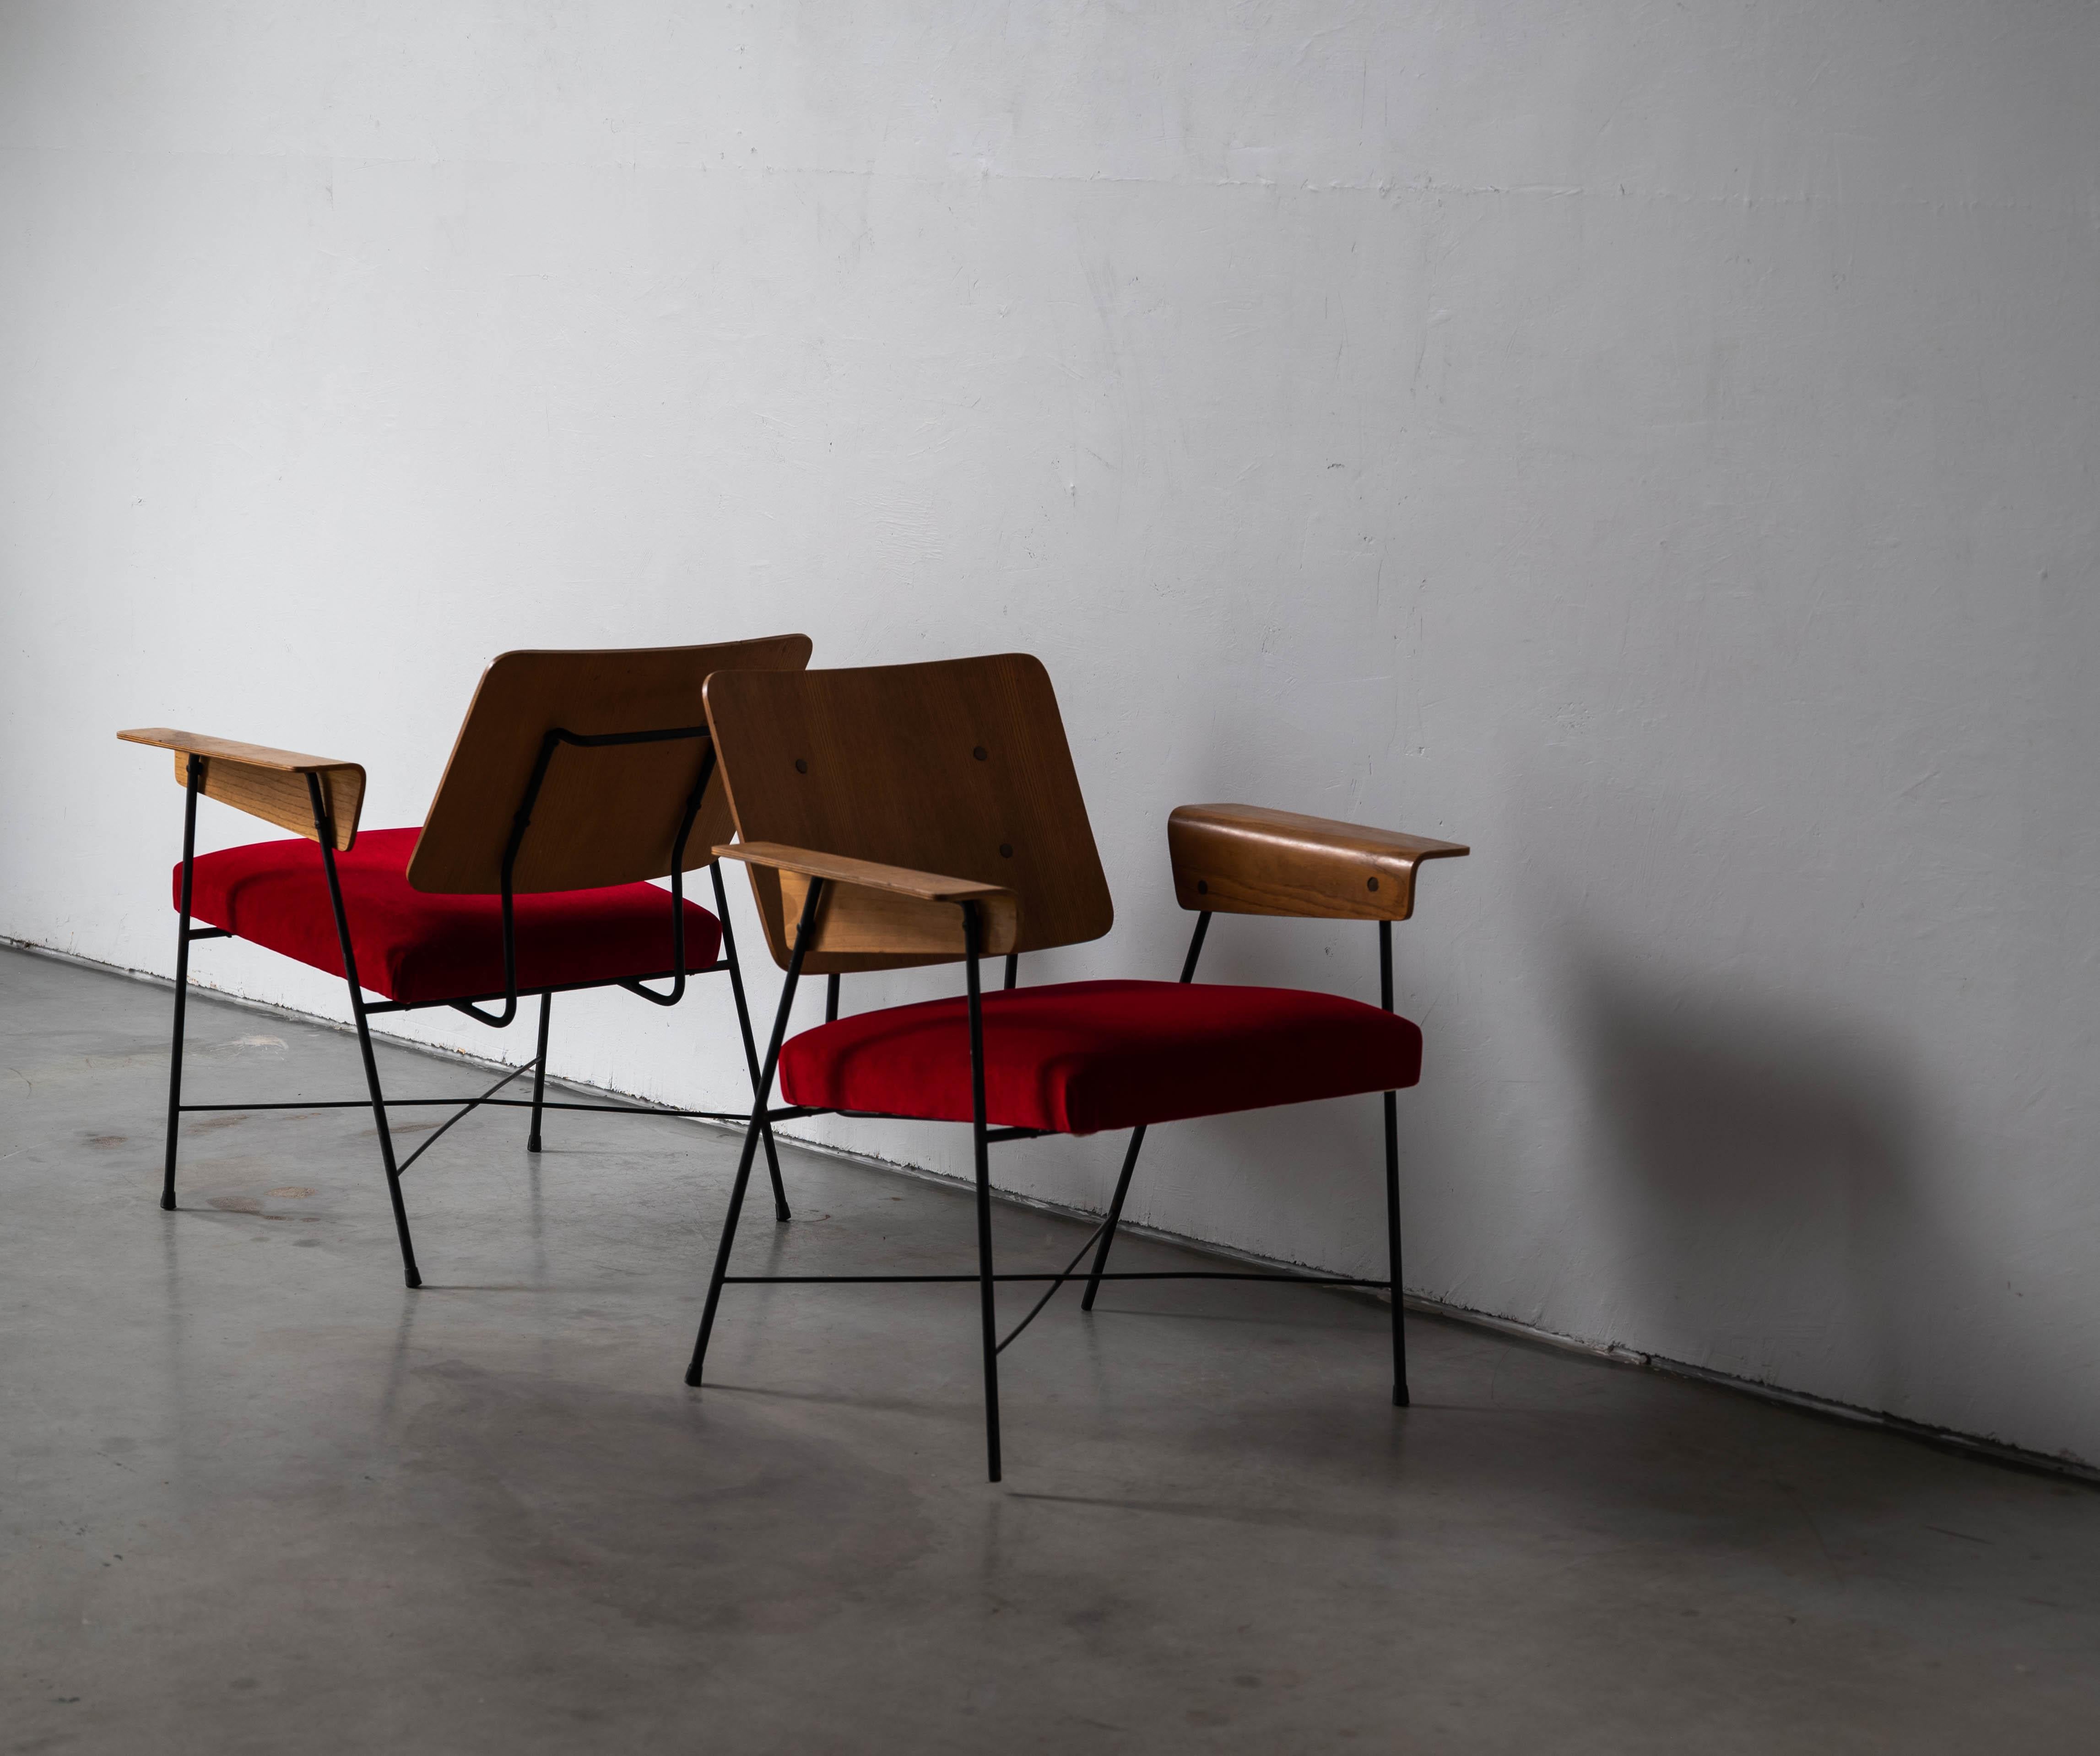 George Coslin, Lounge Chairs, Metal, Red Fabric, Plywood, Italy, 1960s For Sale 1